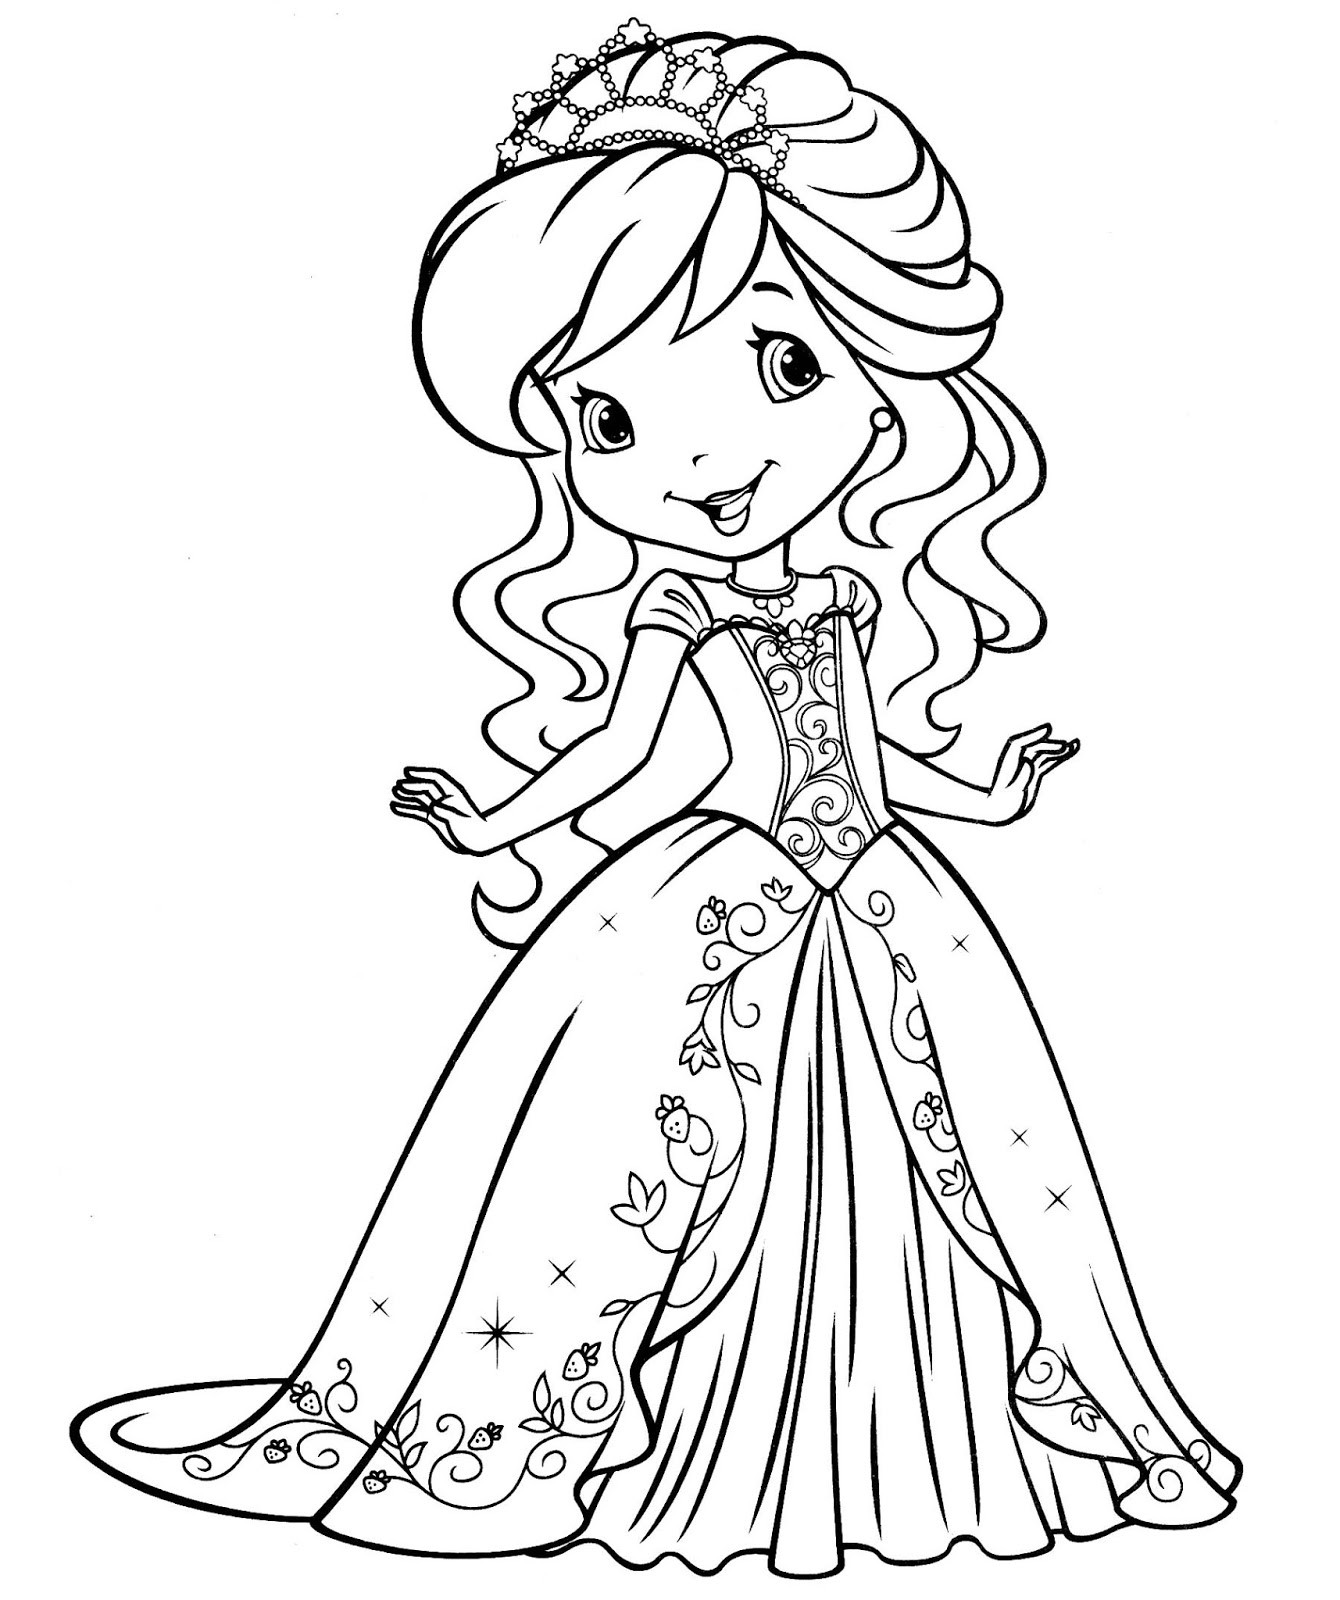 Cute Coloring Sheets For Girls
 Coloring Pages for Girls Best Coloring Pages For Kids